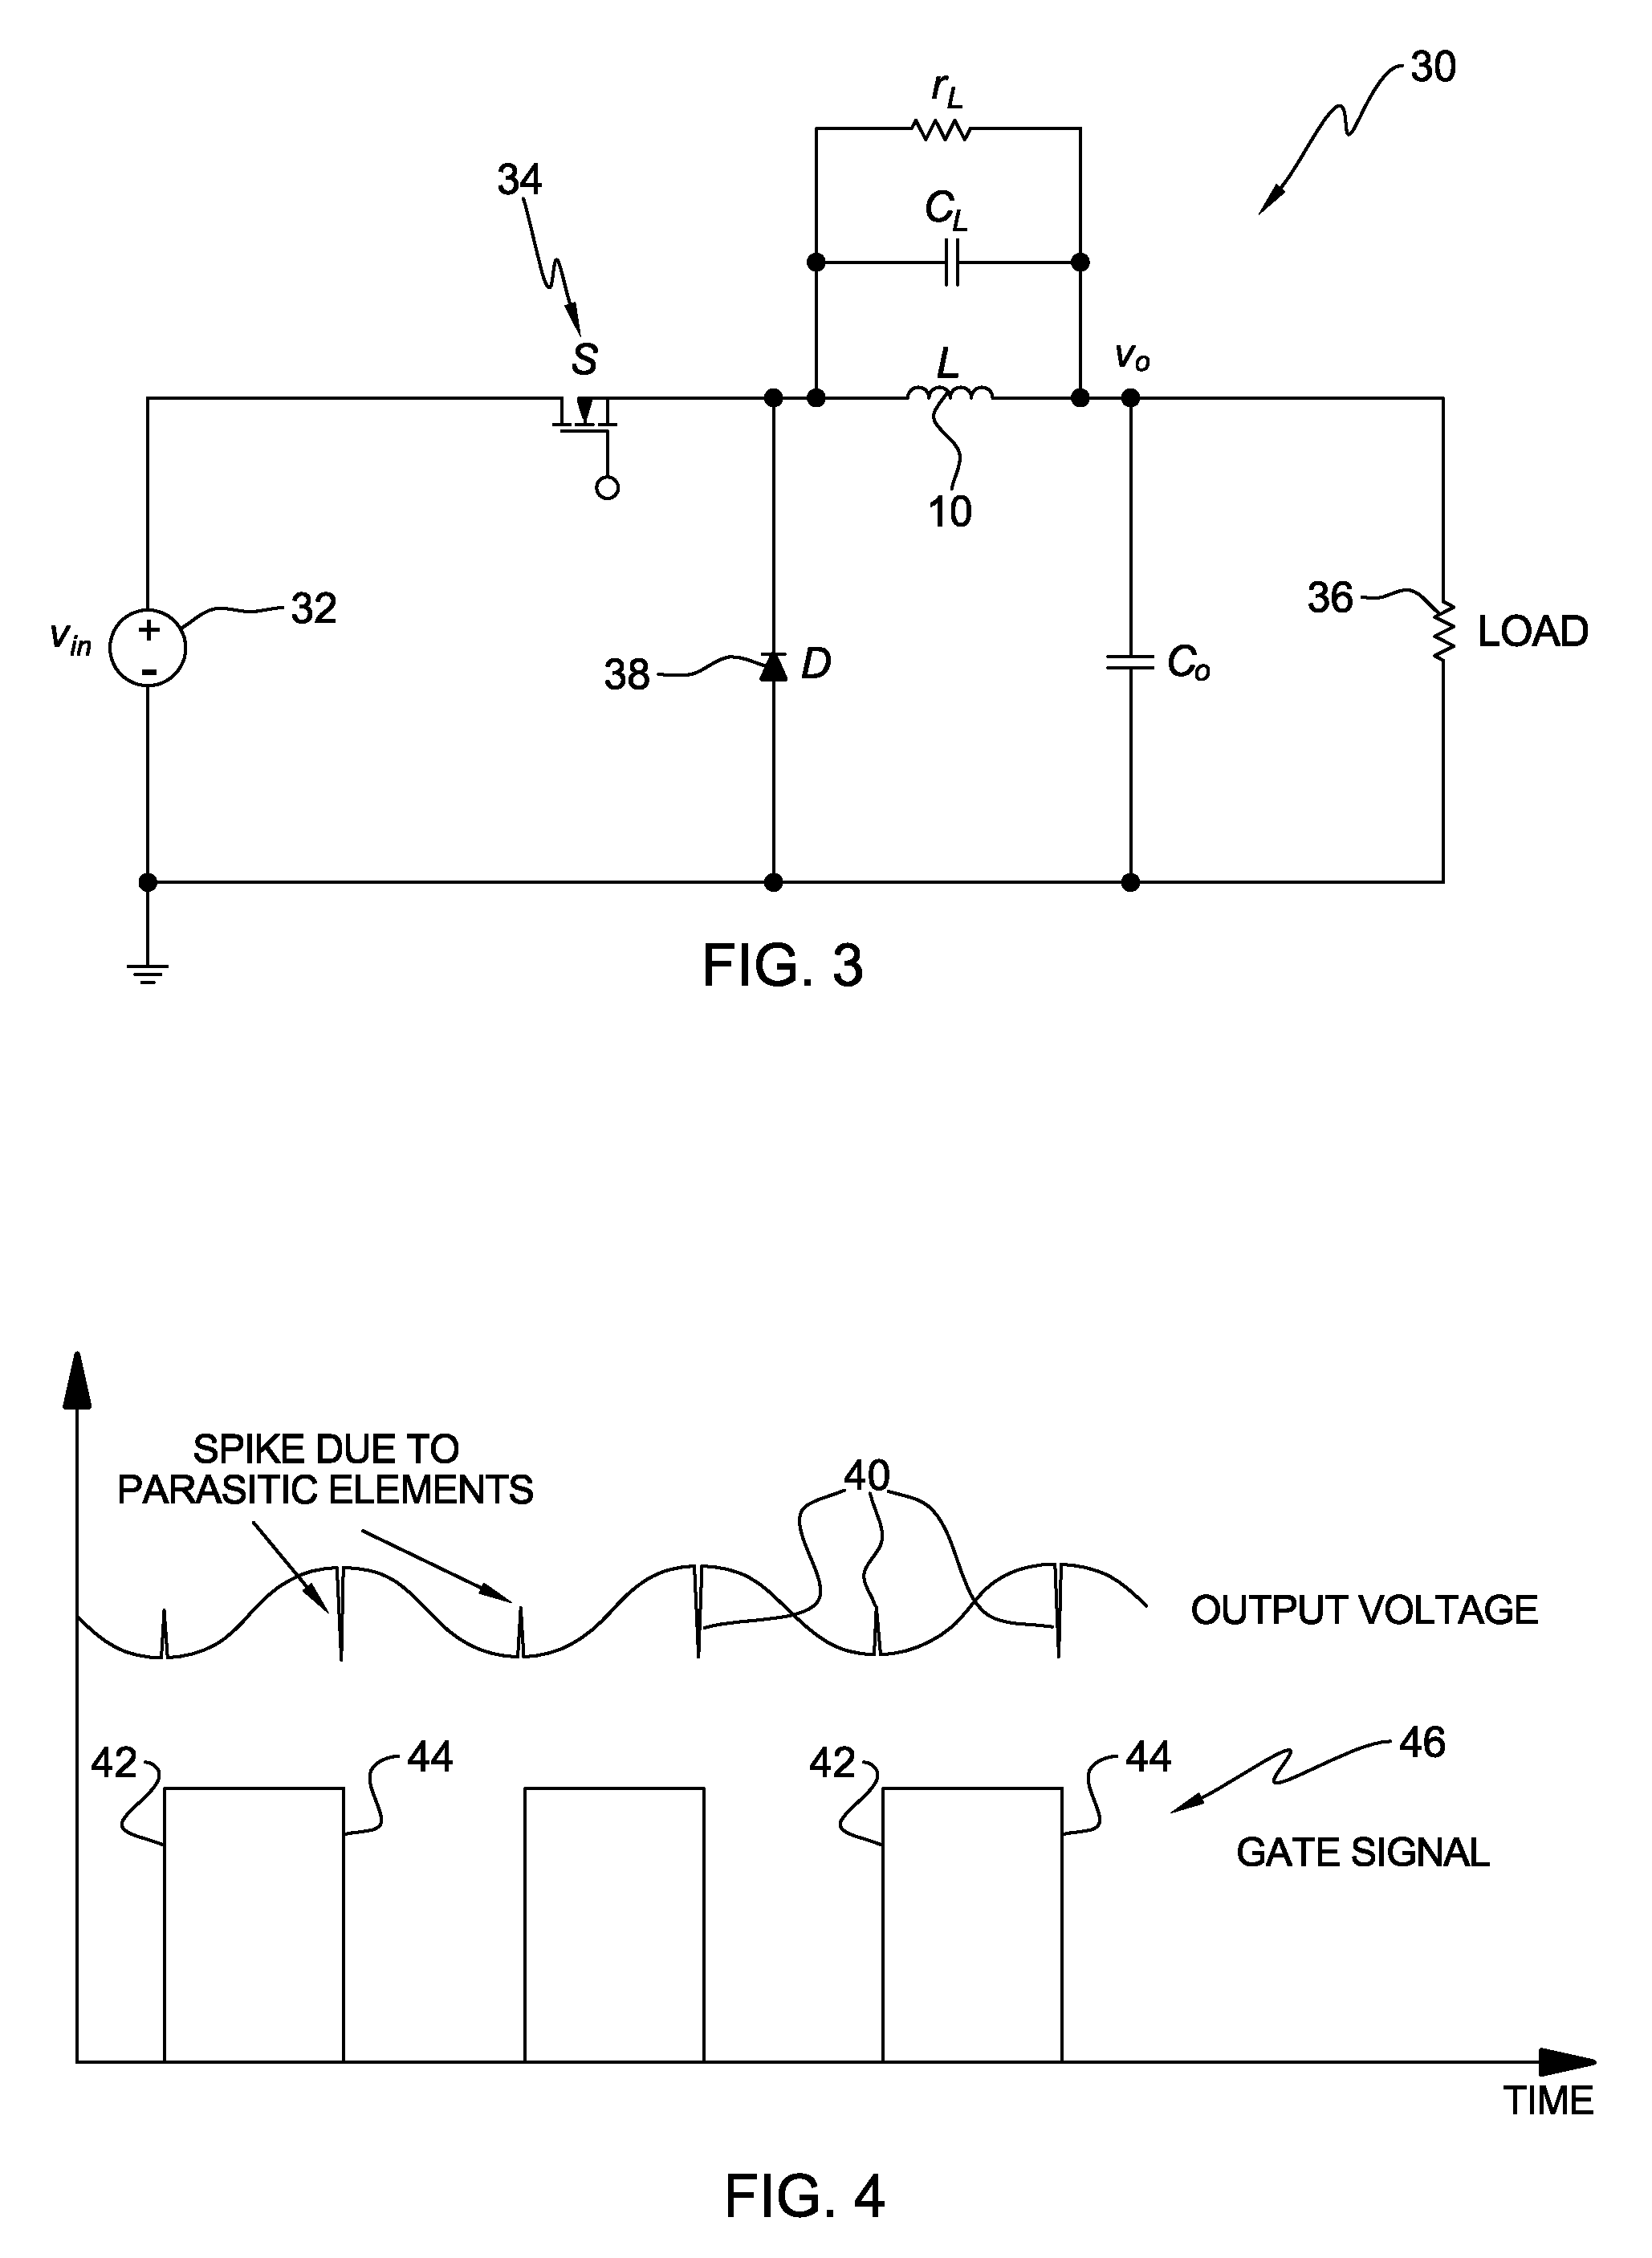 Method and apparatus for suppressing noise caused by parasitic capacitance and/or resistance in an electronic circuit or system